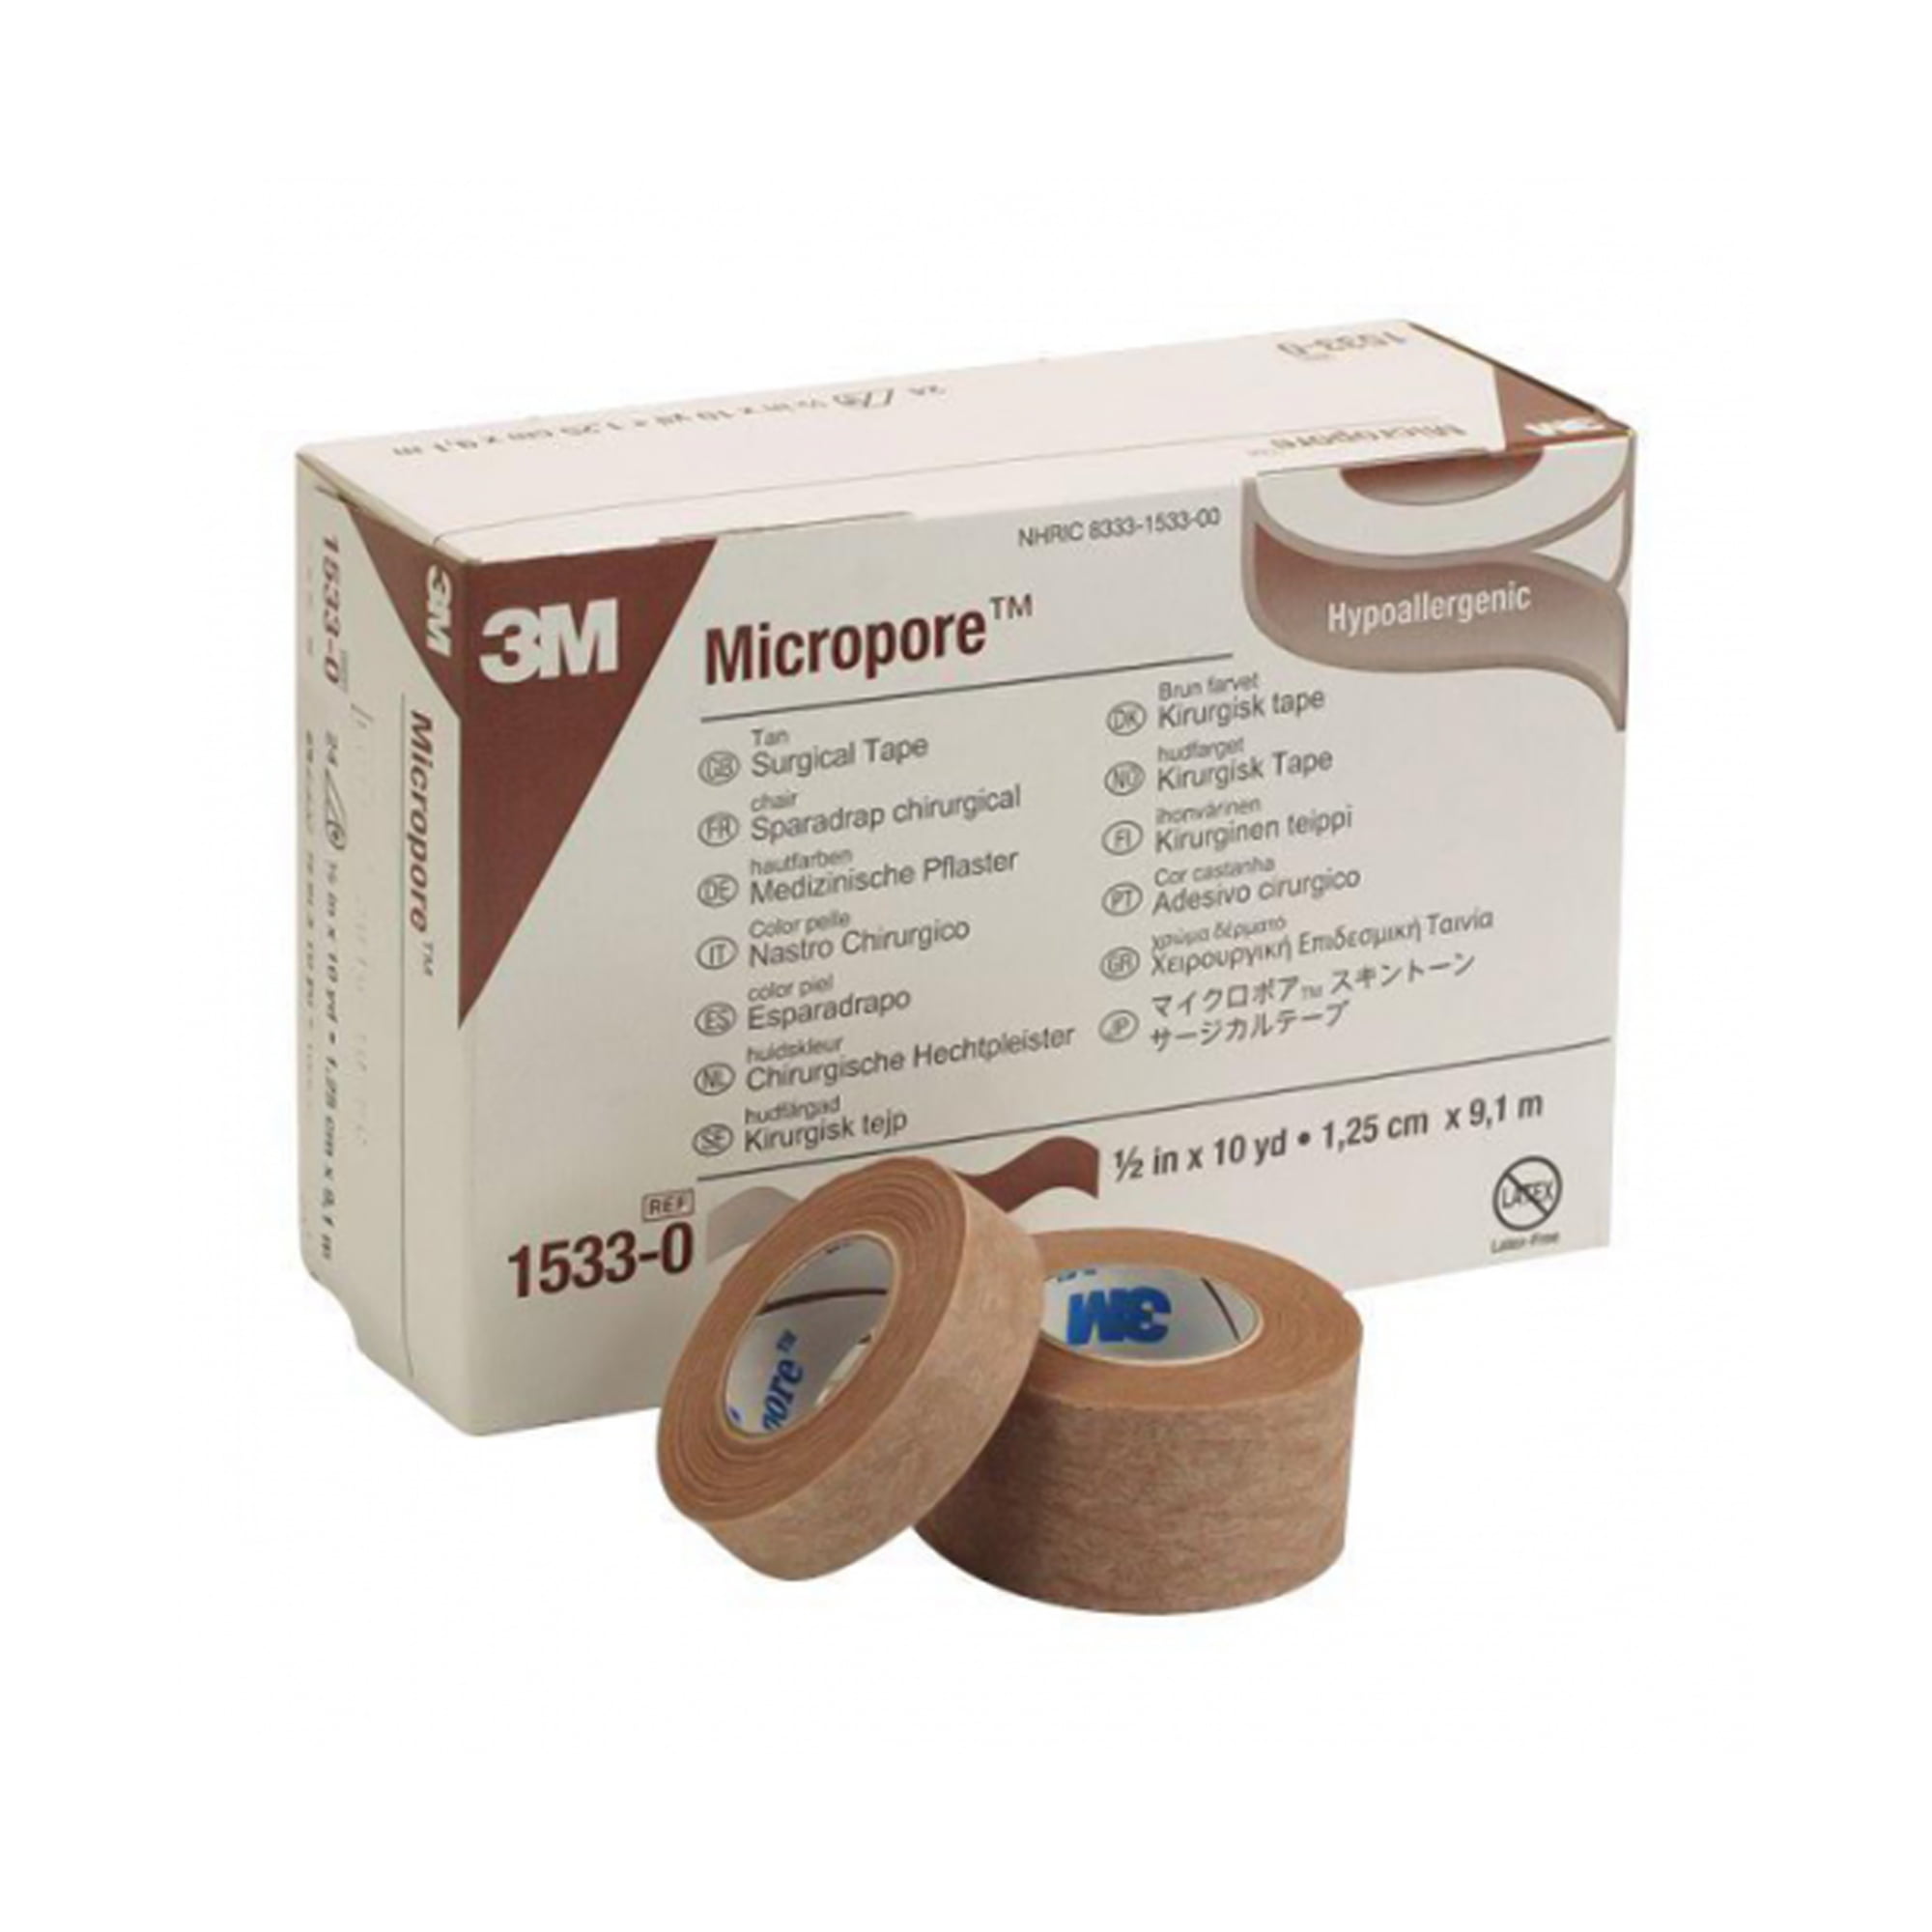 Micropore Surgical Tape - Tan 2